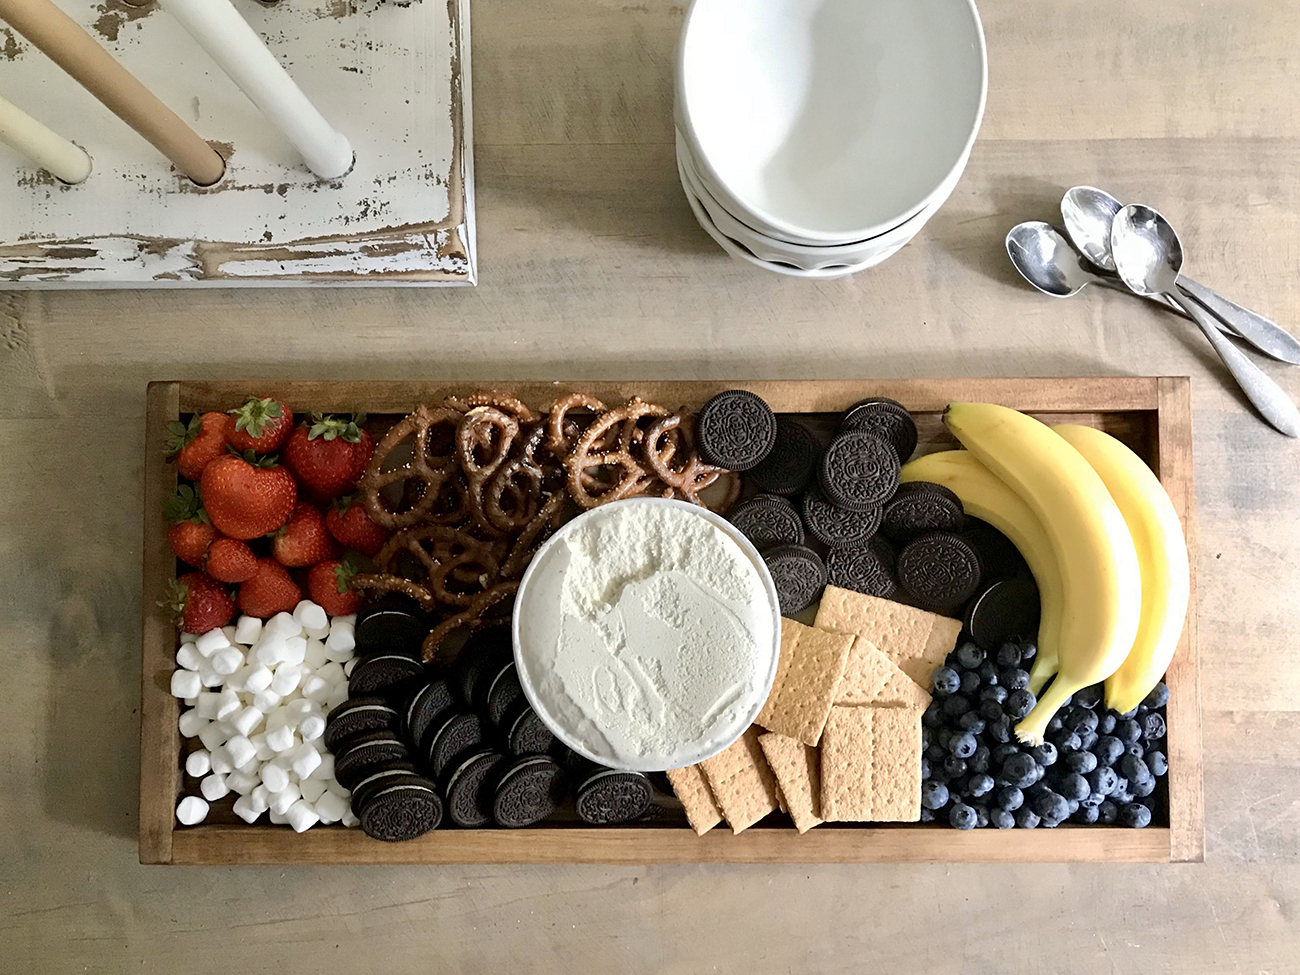 Take a Charcuterie Board Featuring Honeycomb Wood Crafts